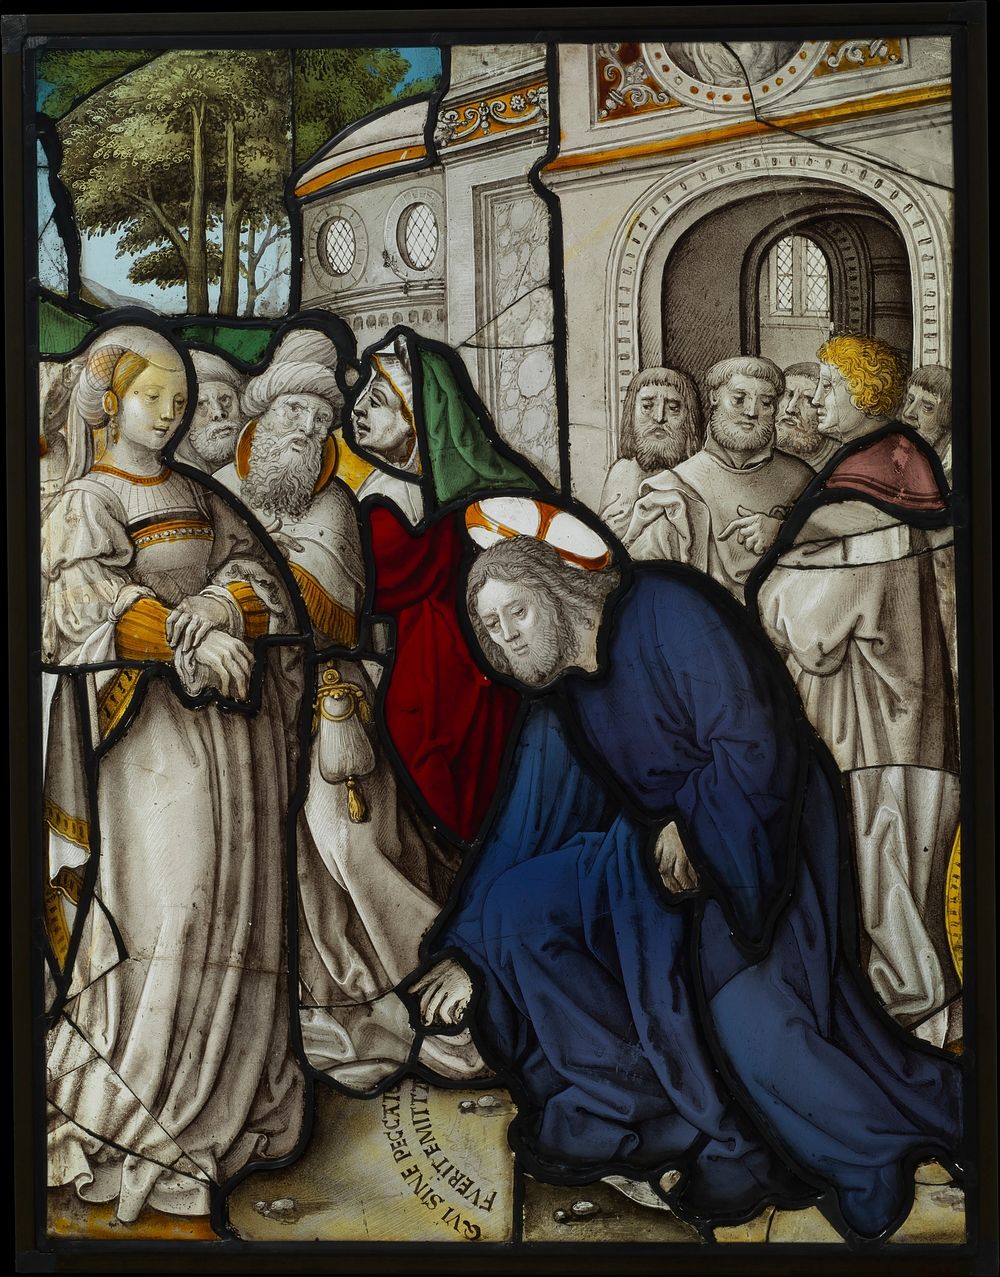 Christ and the Woman Taken in Adultery (one of a set of 12 scenes from The Life of Christ) by Jan Rombouts